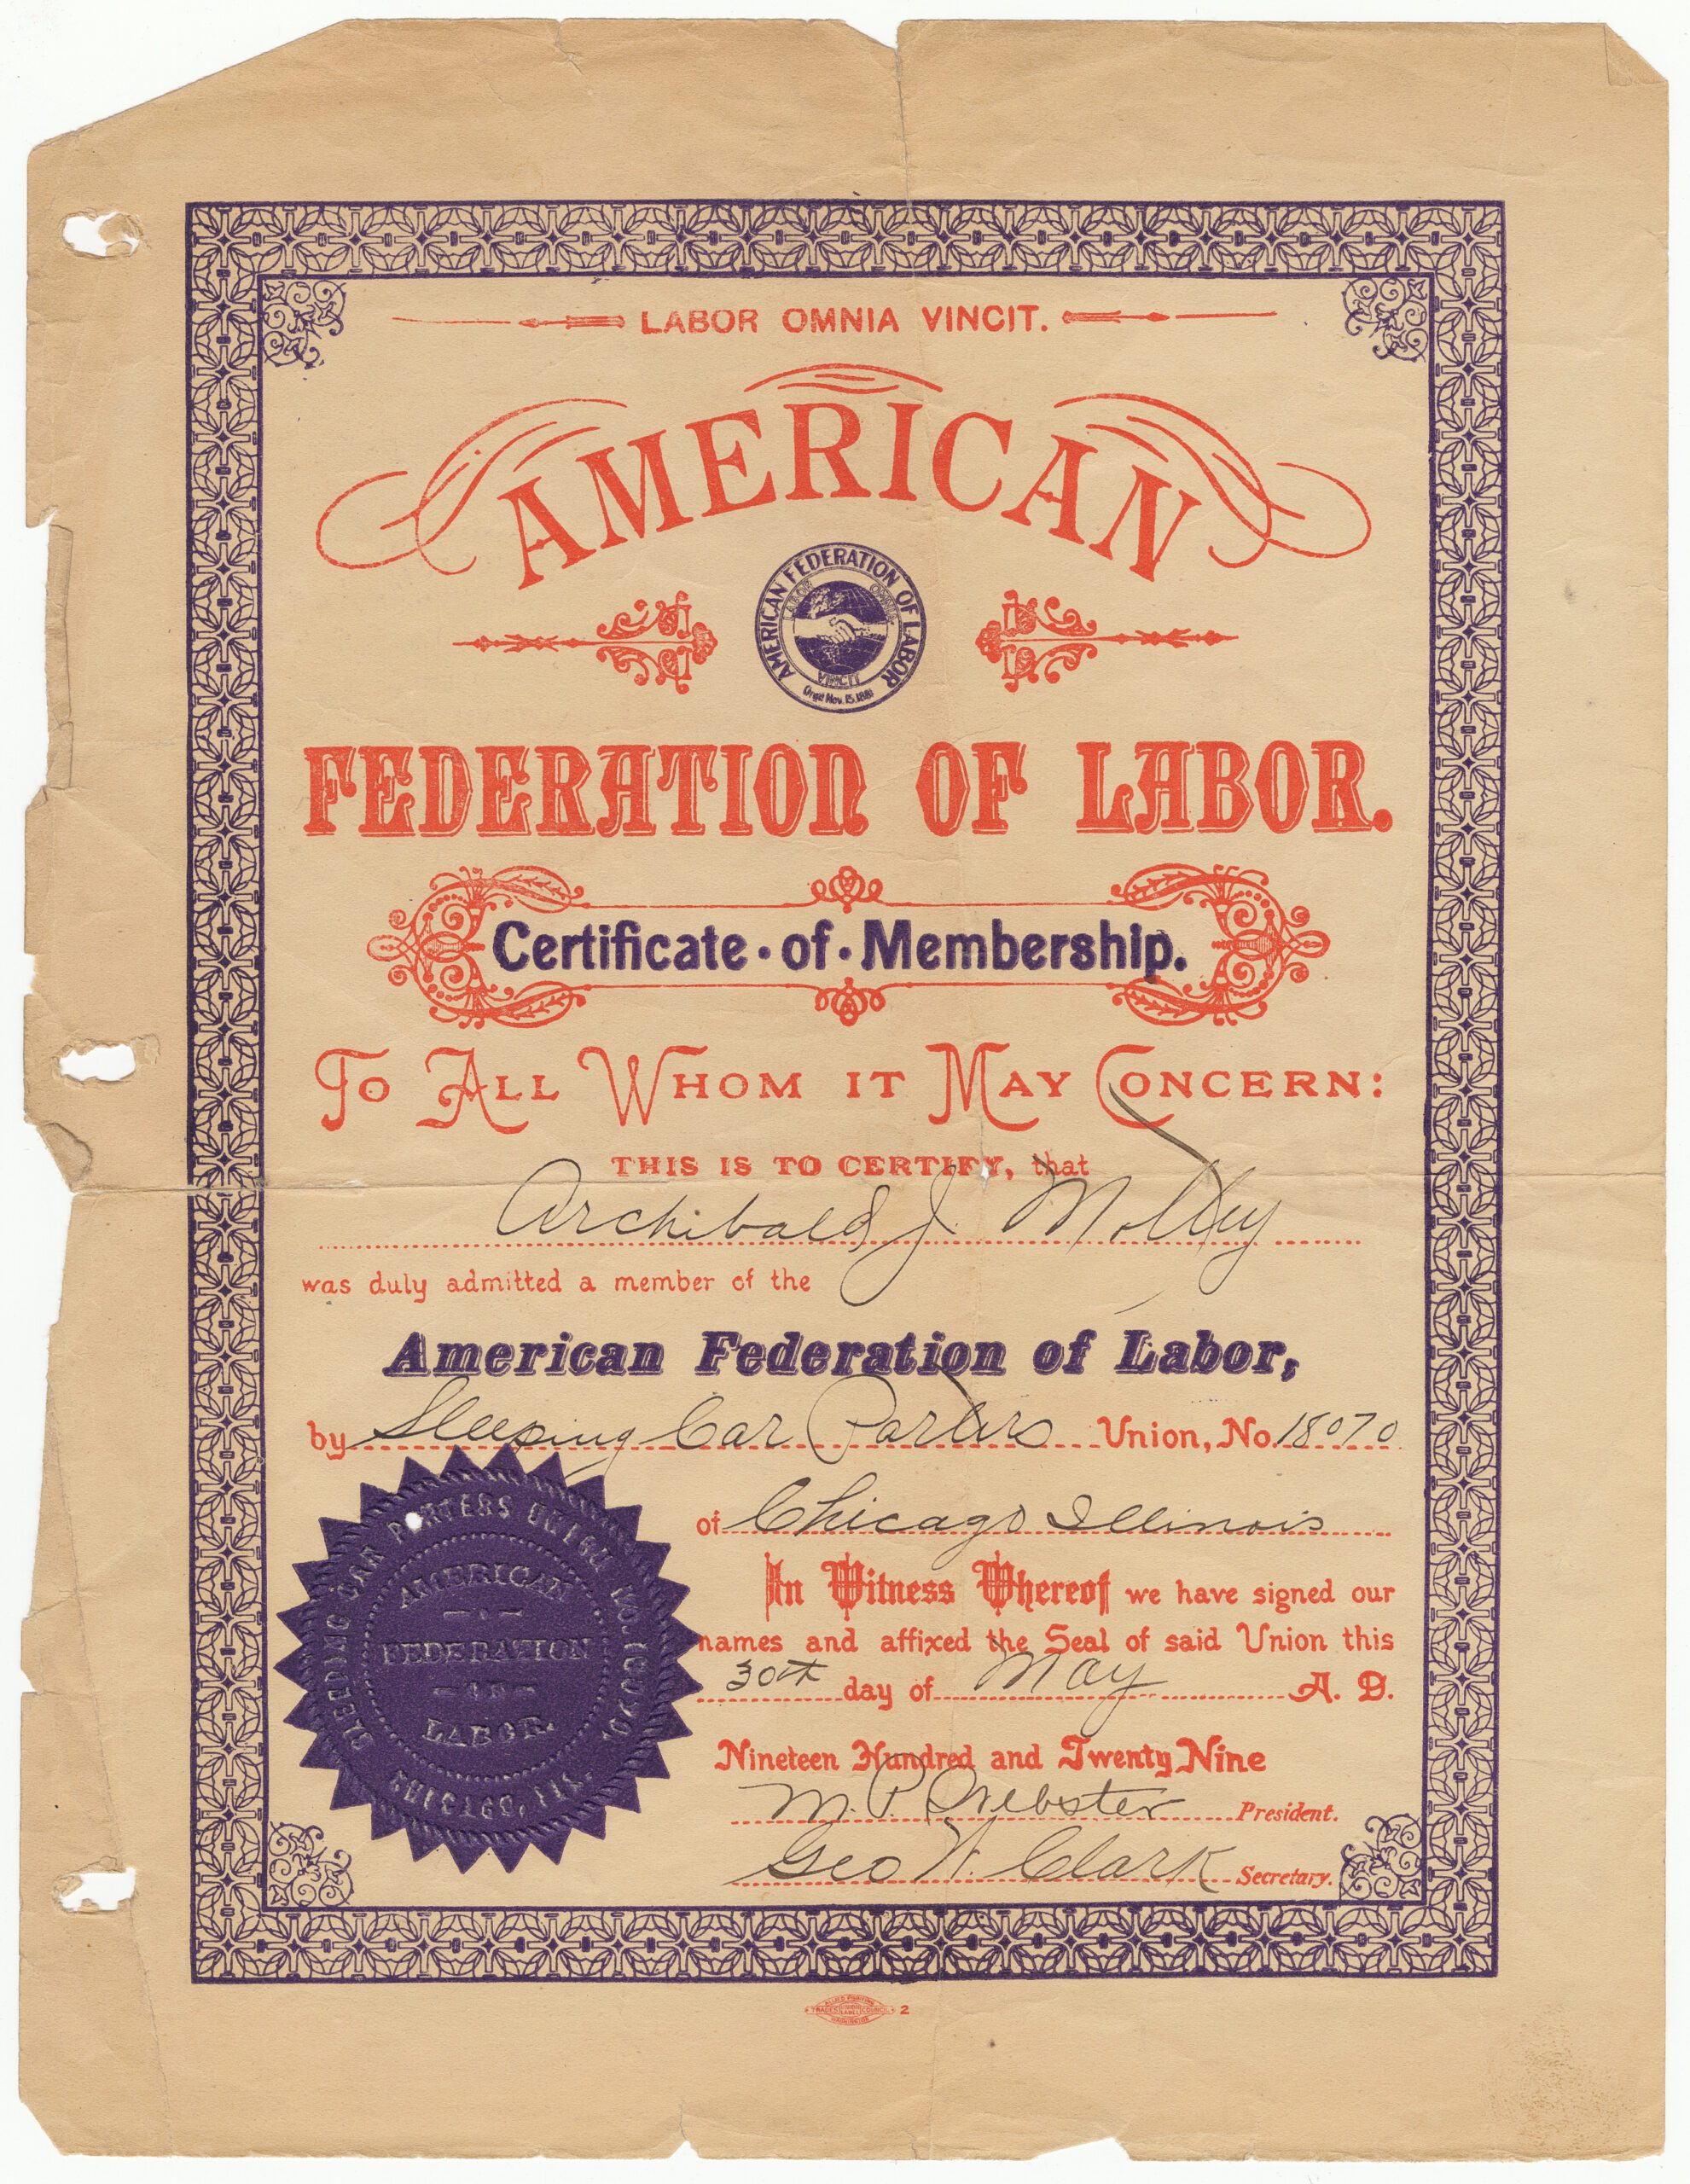 Certificate of membership in the American Federation of Labor through the Sleeping Car Porters for Archibald Motley